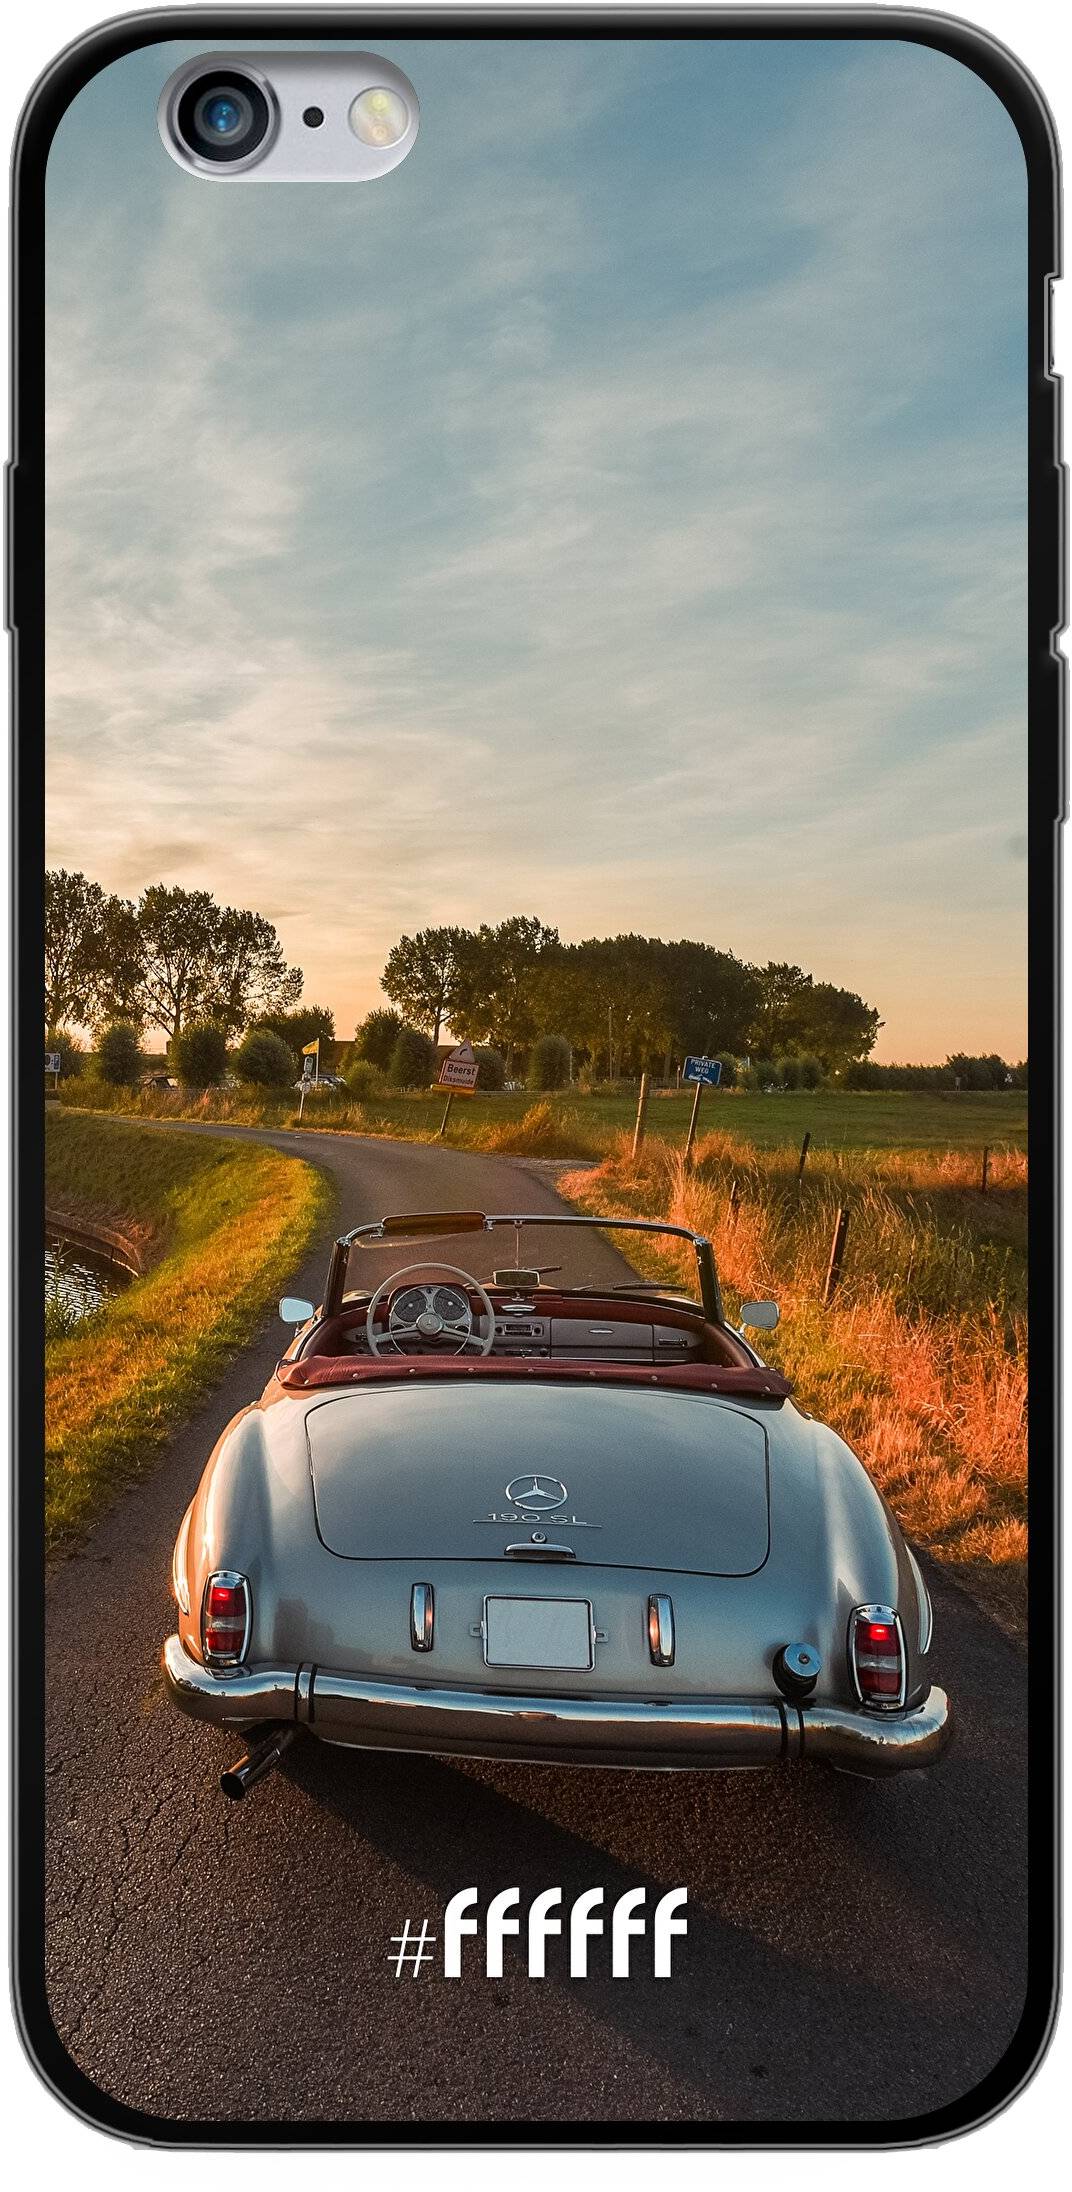 Oldtimer iPhone 6s